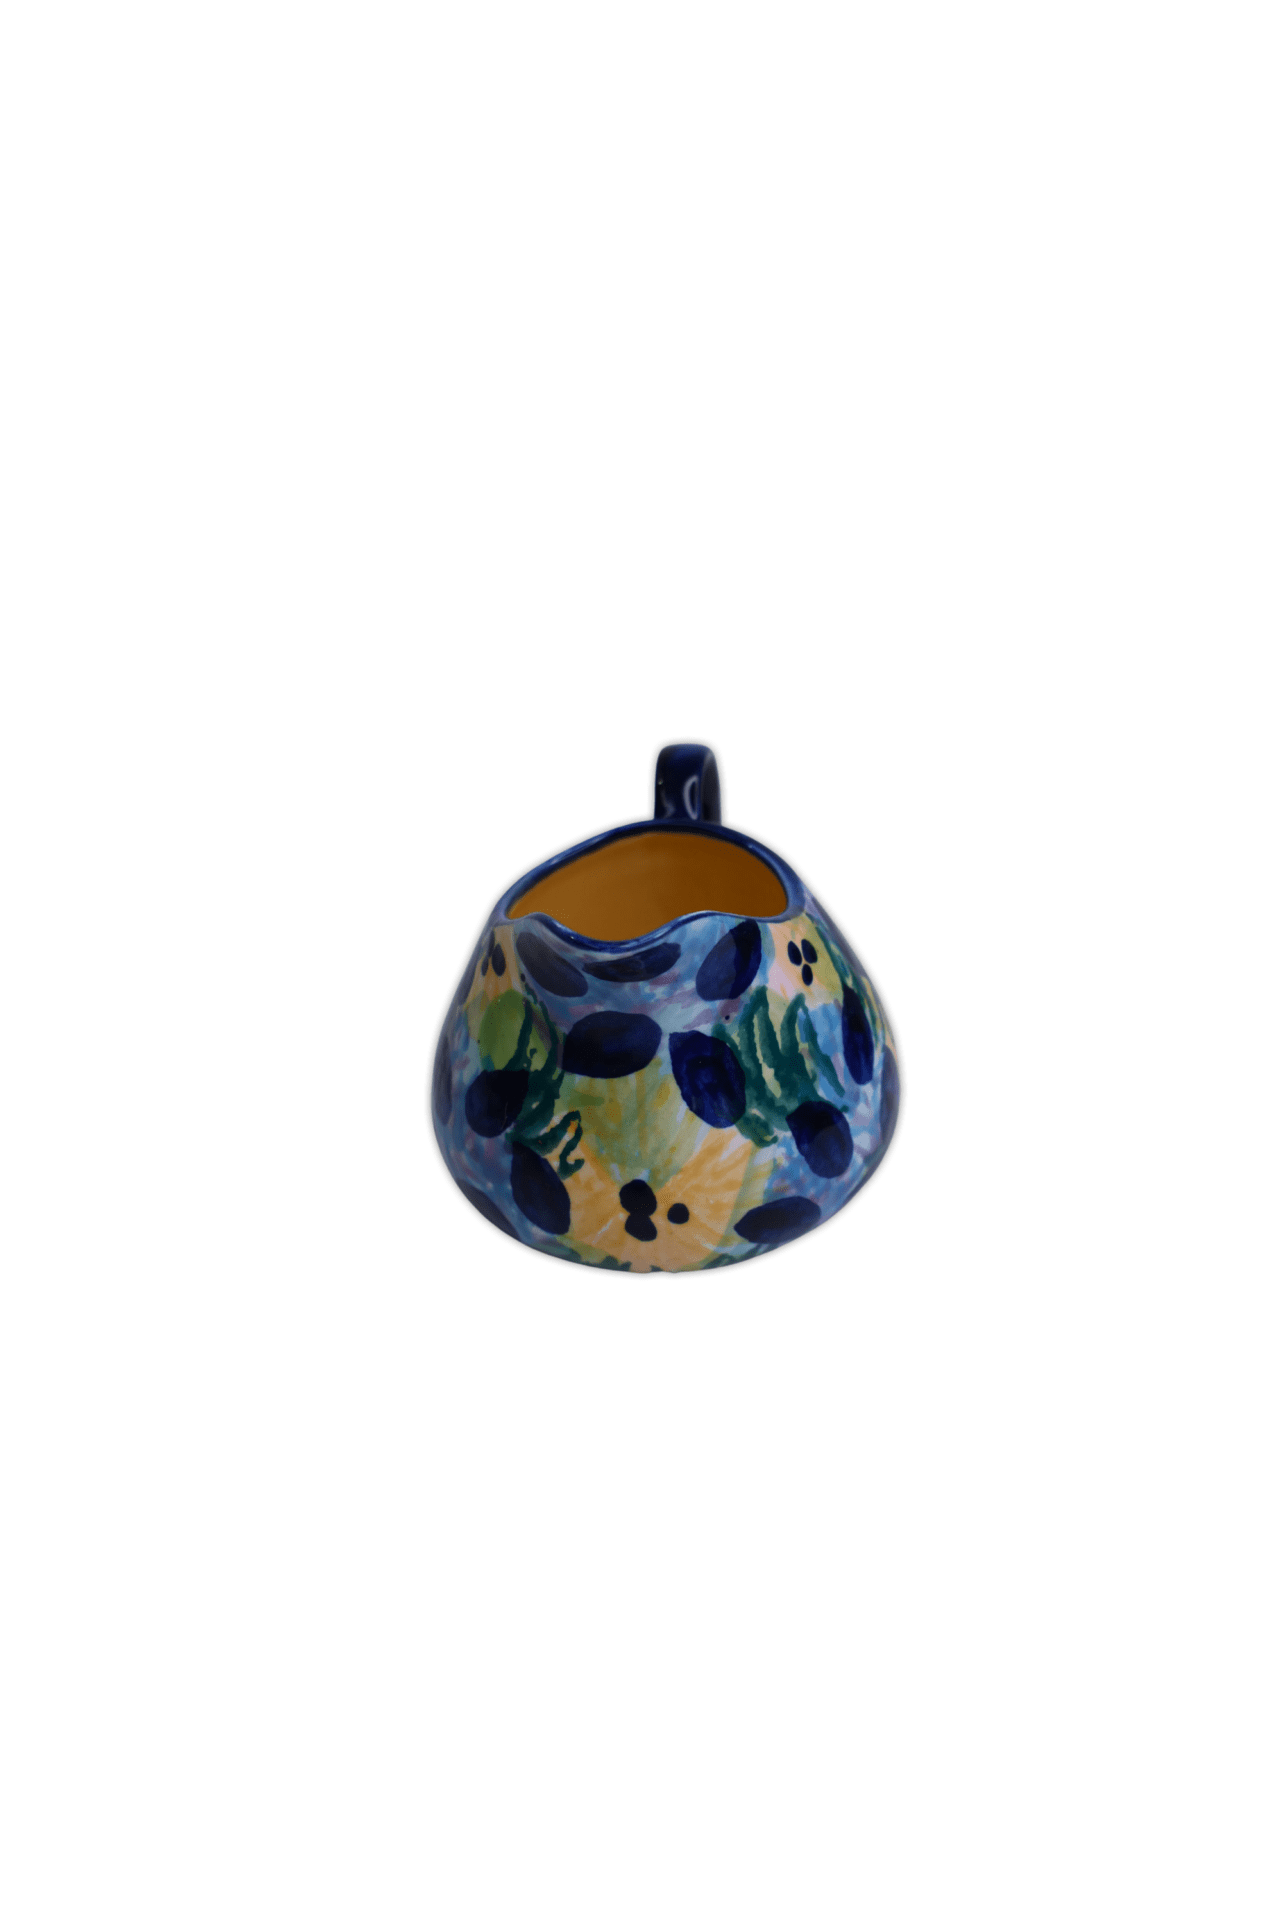 Small gravy jug for your home featuring a multicoloured floral glaze and yellow inside.